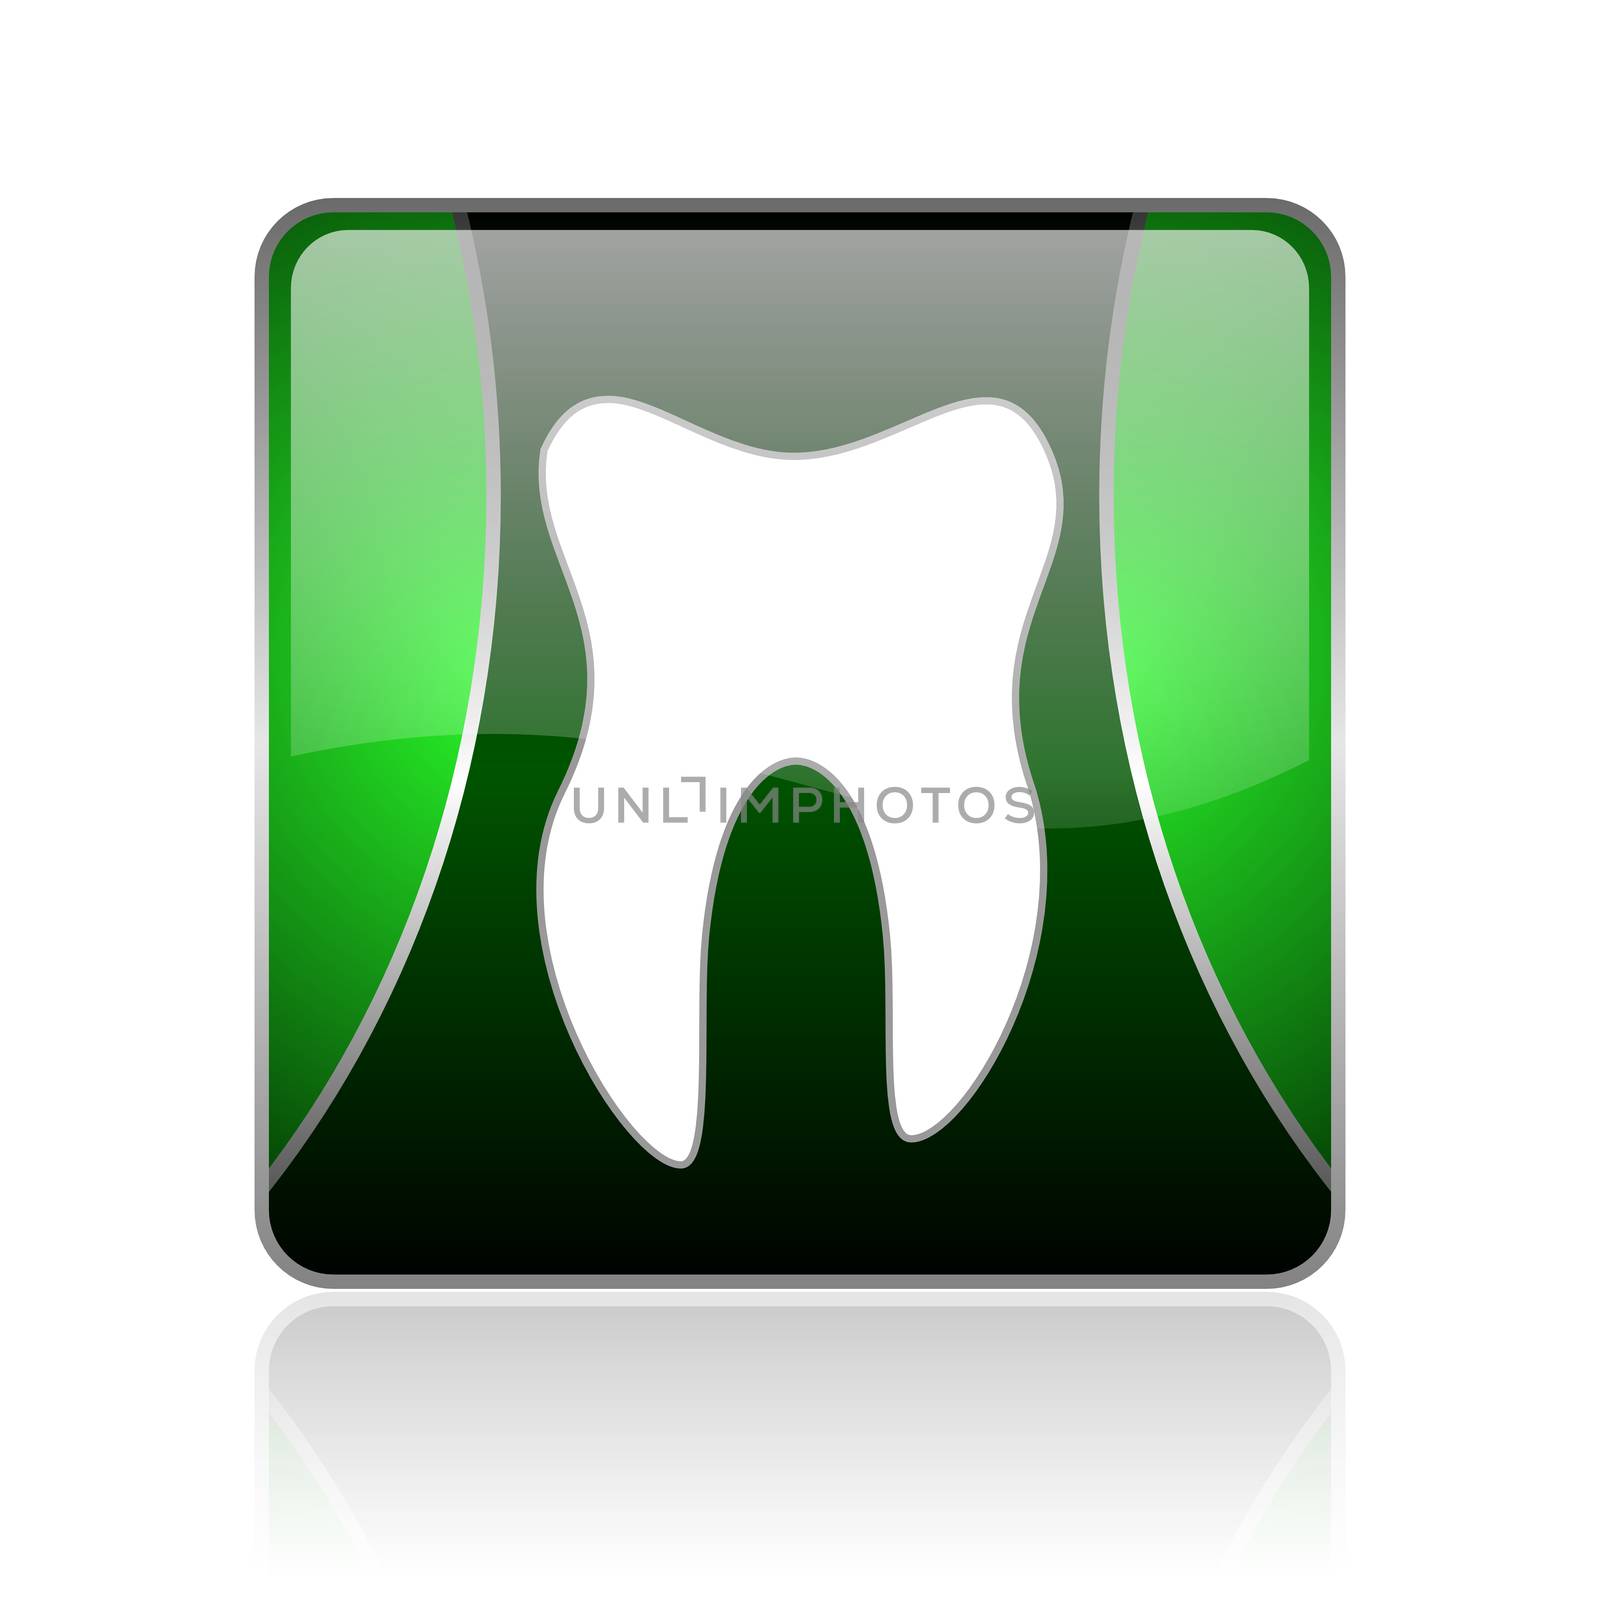 black and green square glossy internet icon on white background with reflaction